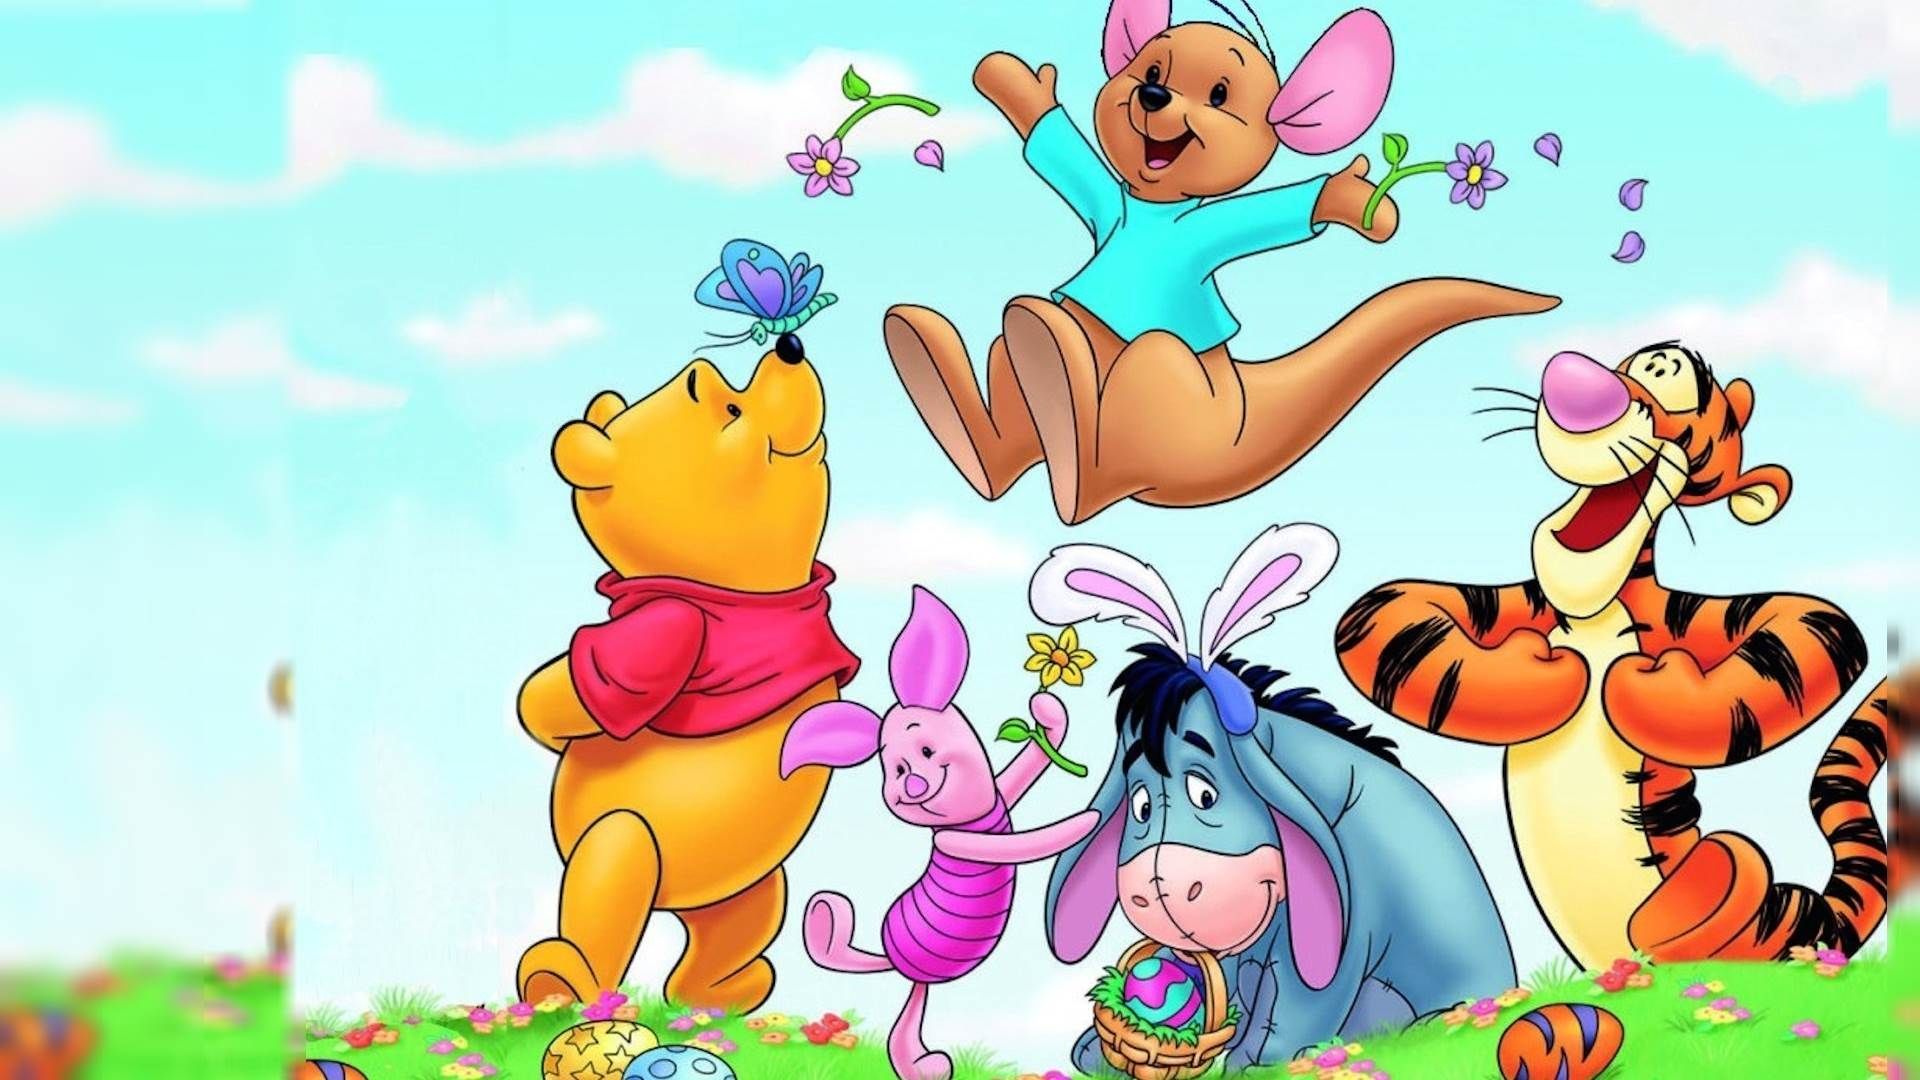 Winnie the Pooh Character Wallpapers on WallpaperDog